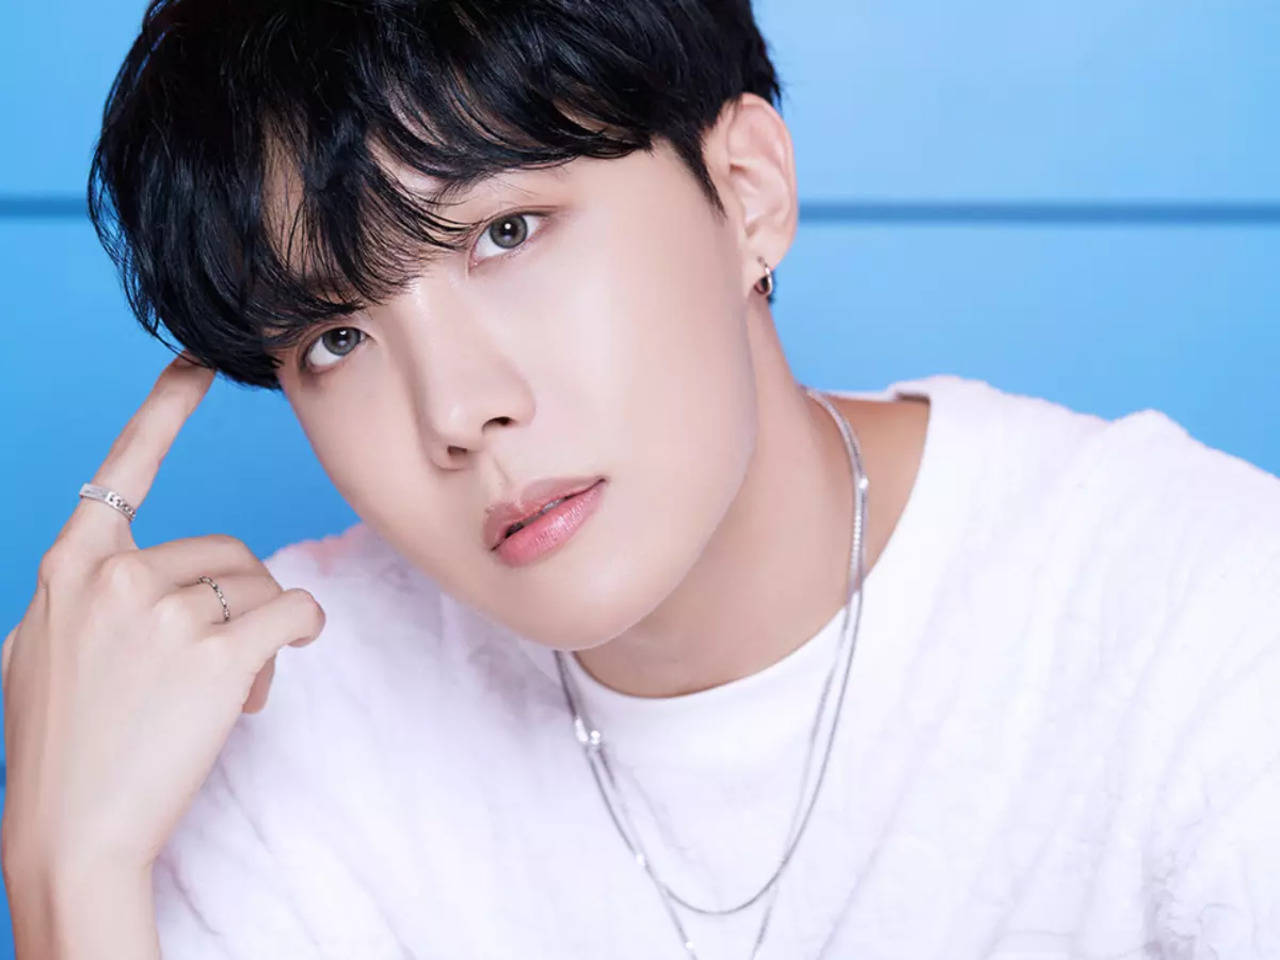 Ducktan makes a comeback! This time as part of BTS member J-Hope's